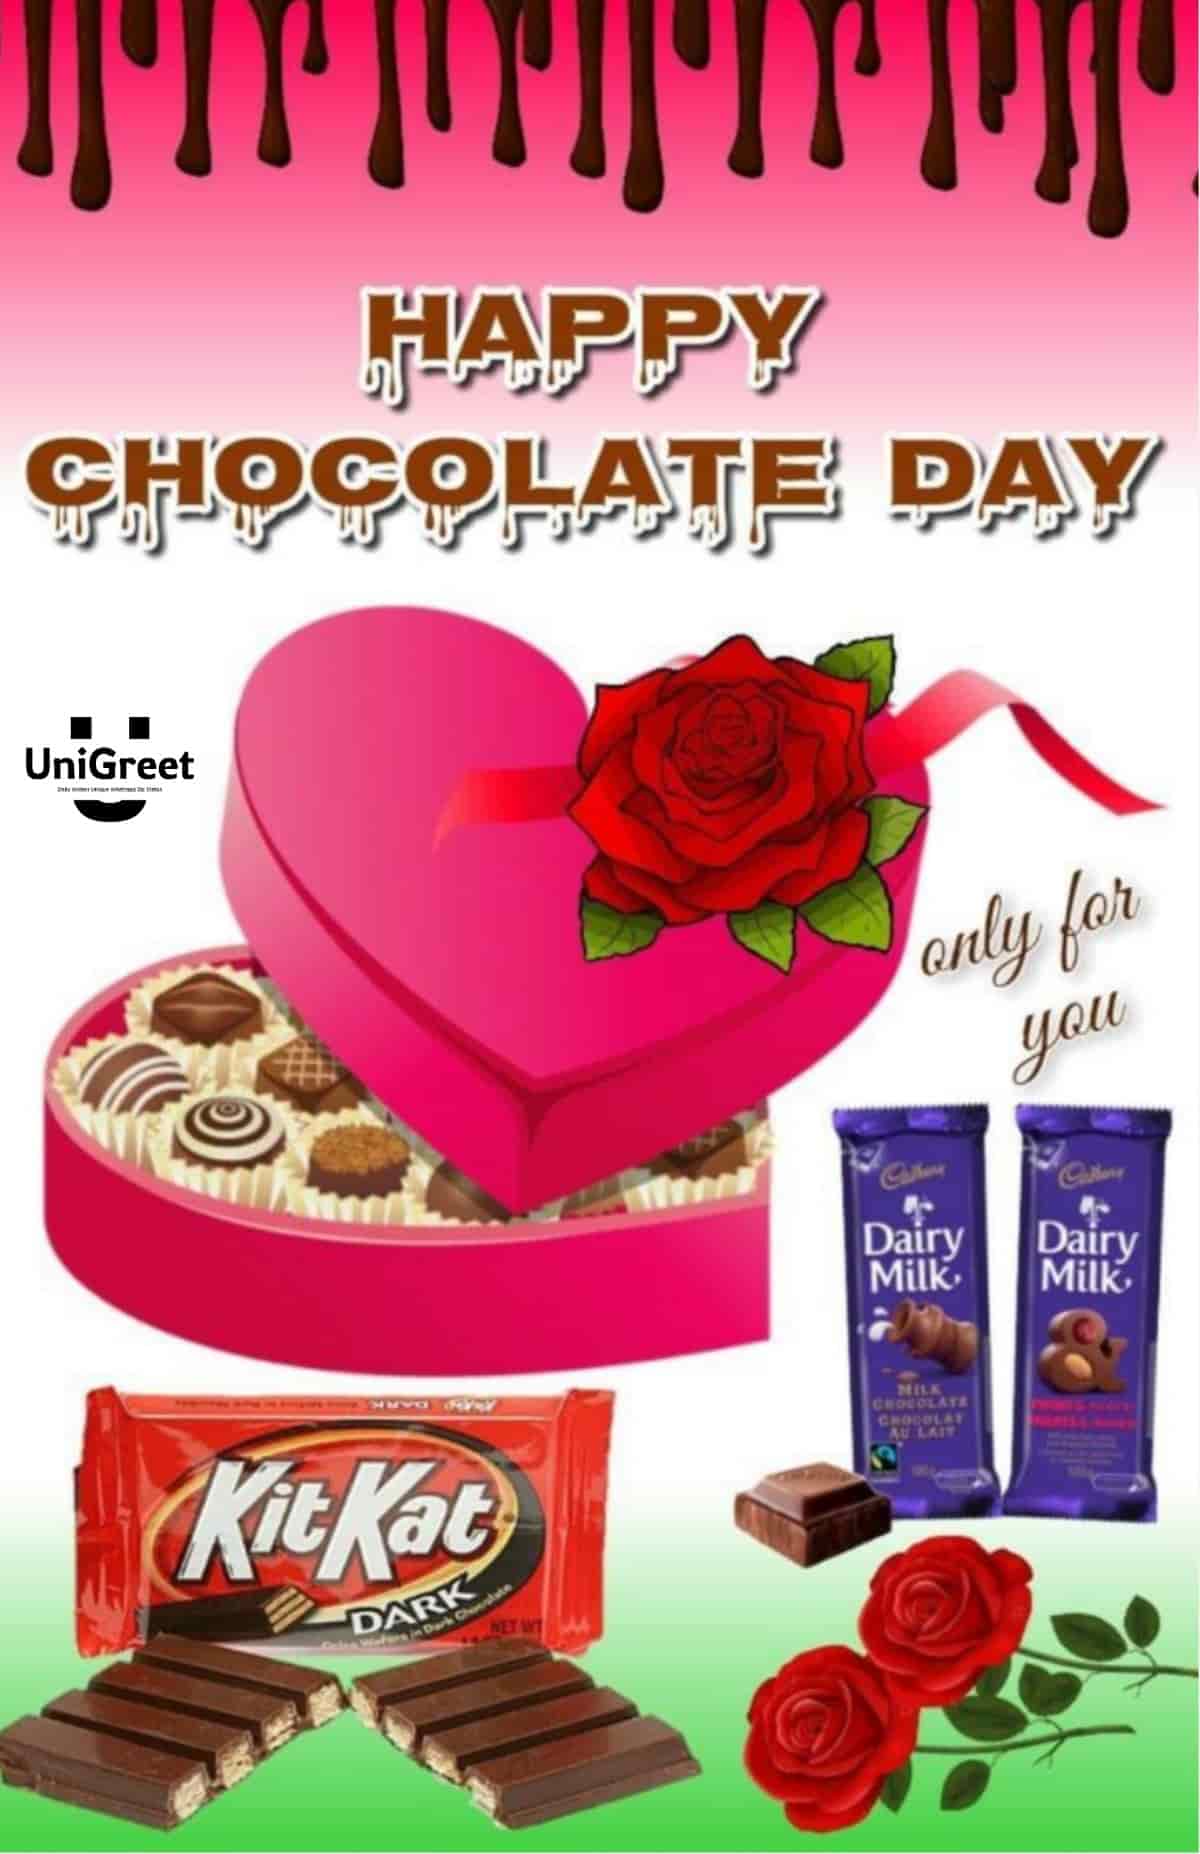 happy chocolate day images download